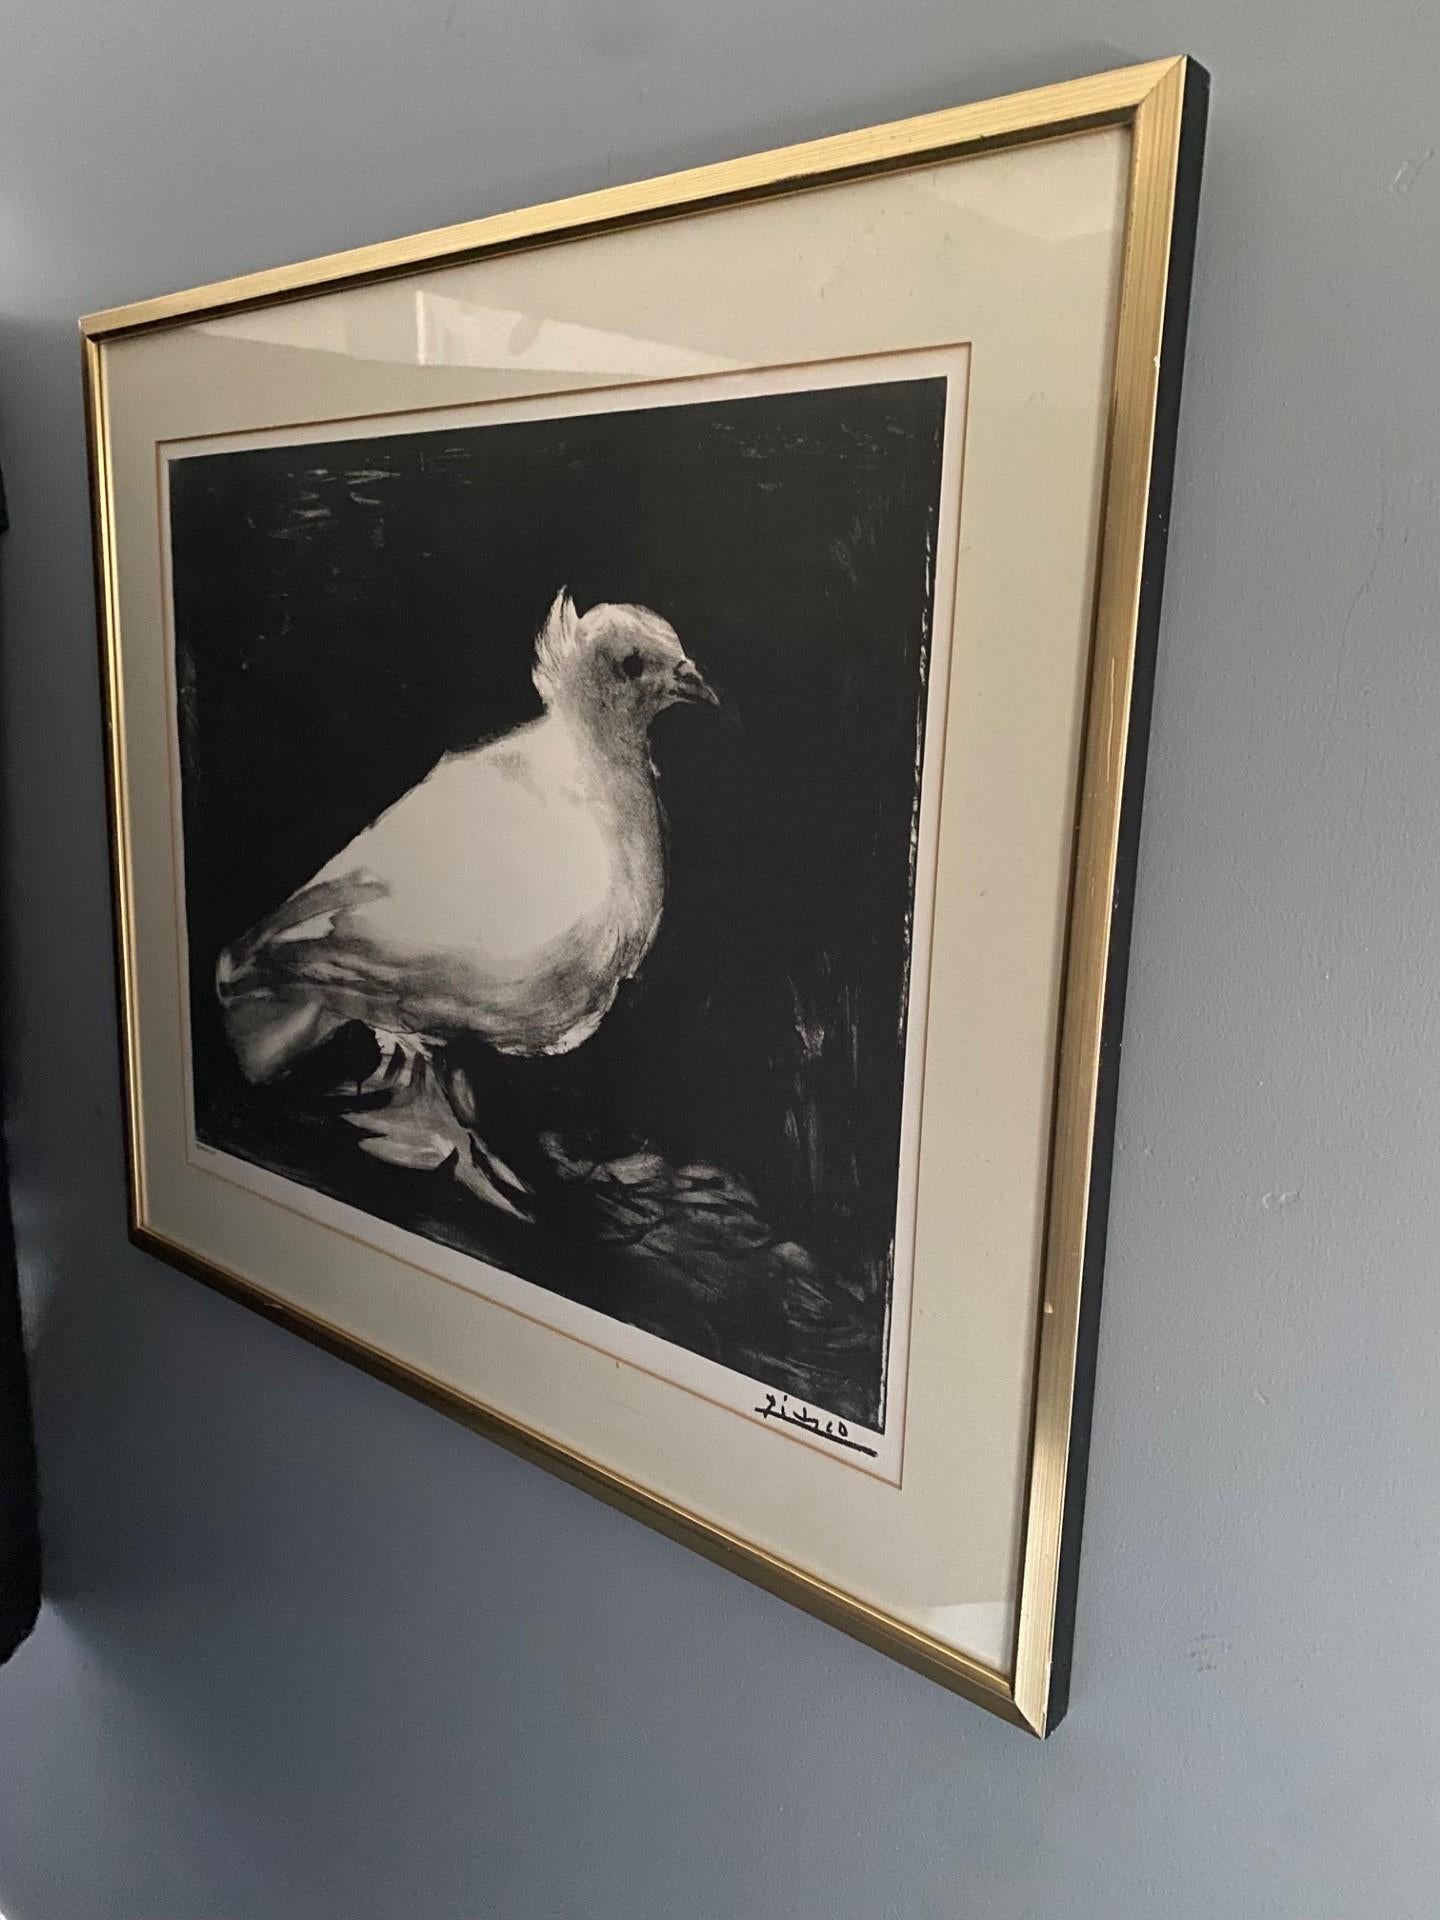 Glass Vintage Framed Picasso “Dove” or “La Colombe” Lithograph by Mourlot For Sale